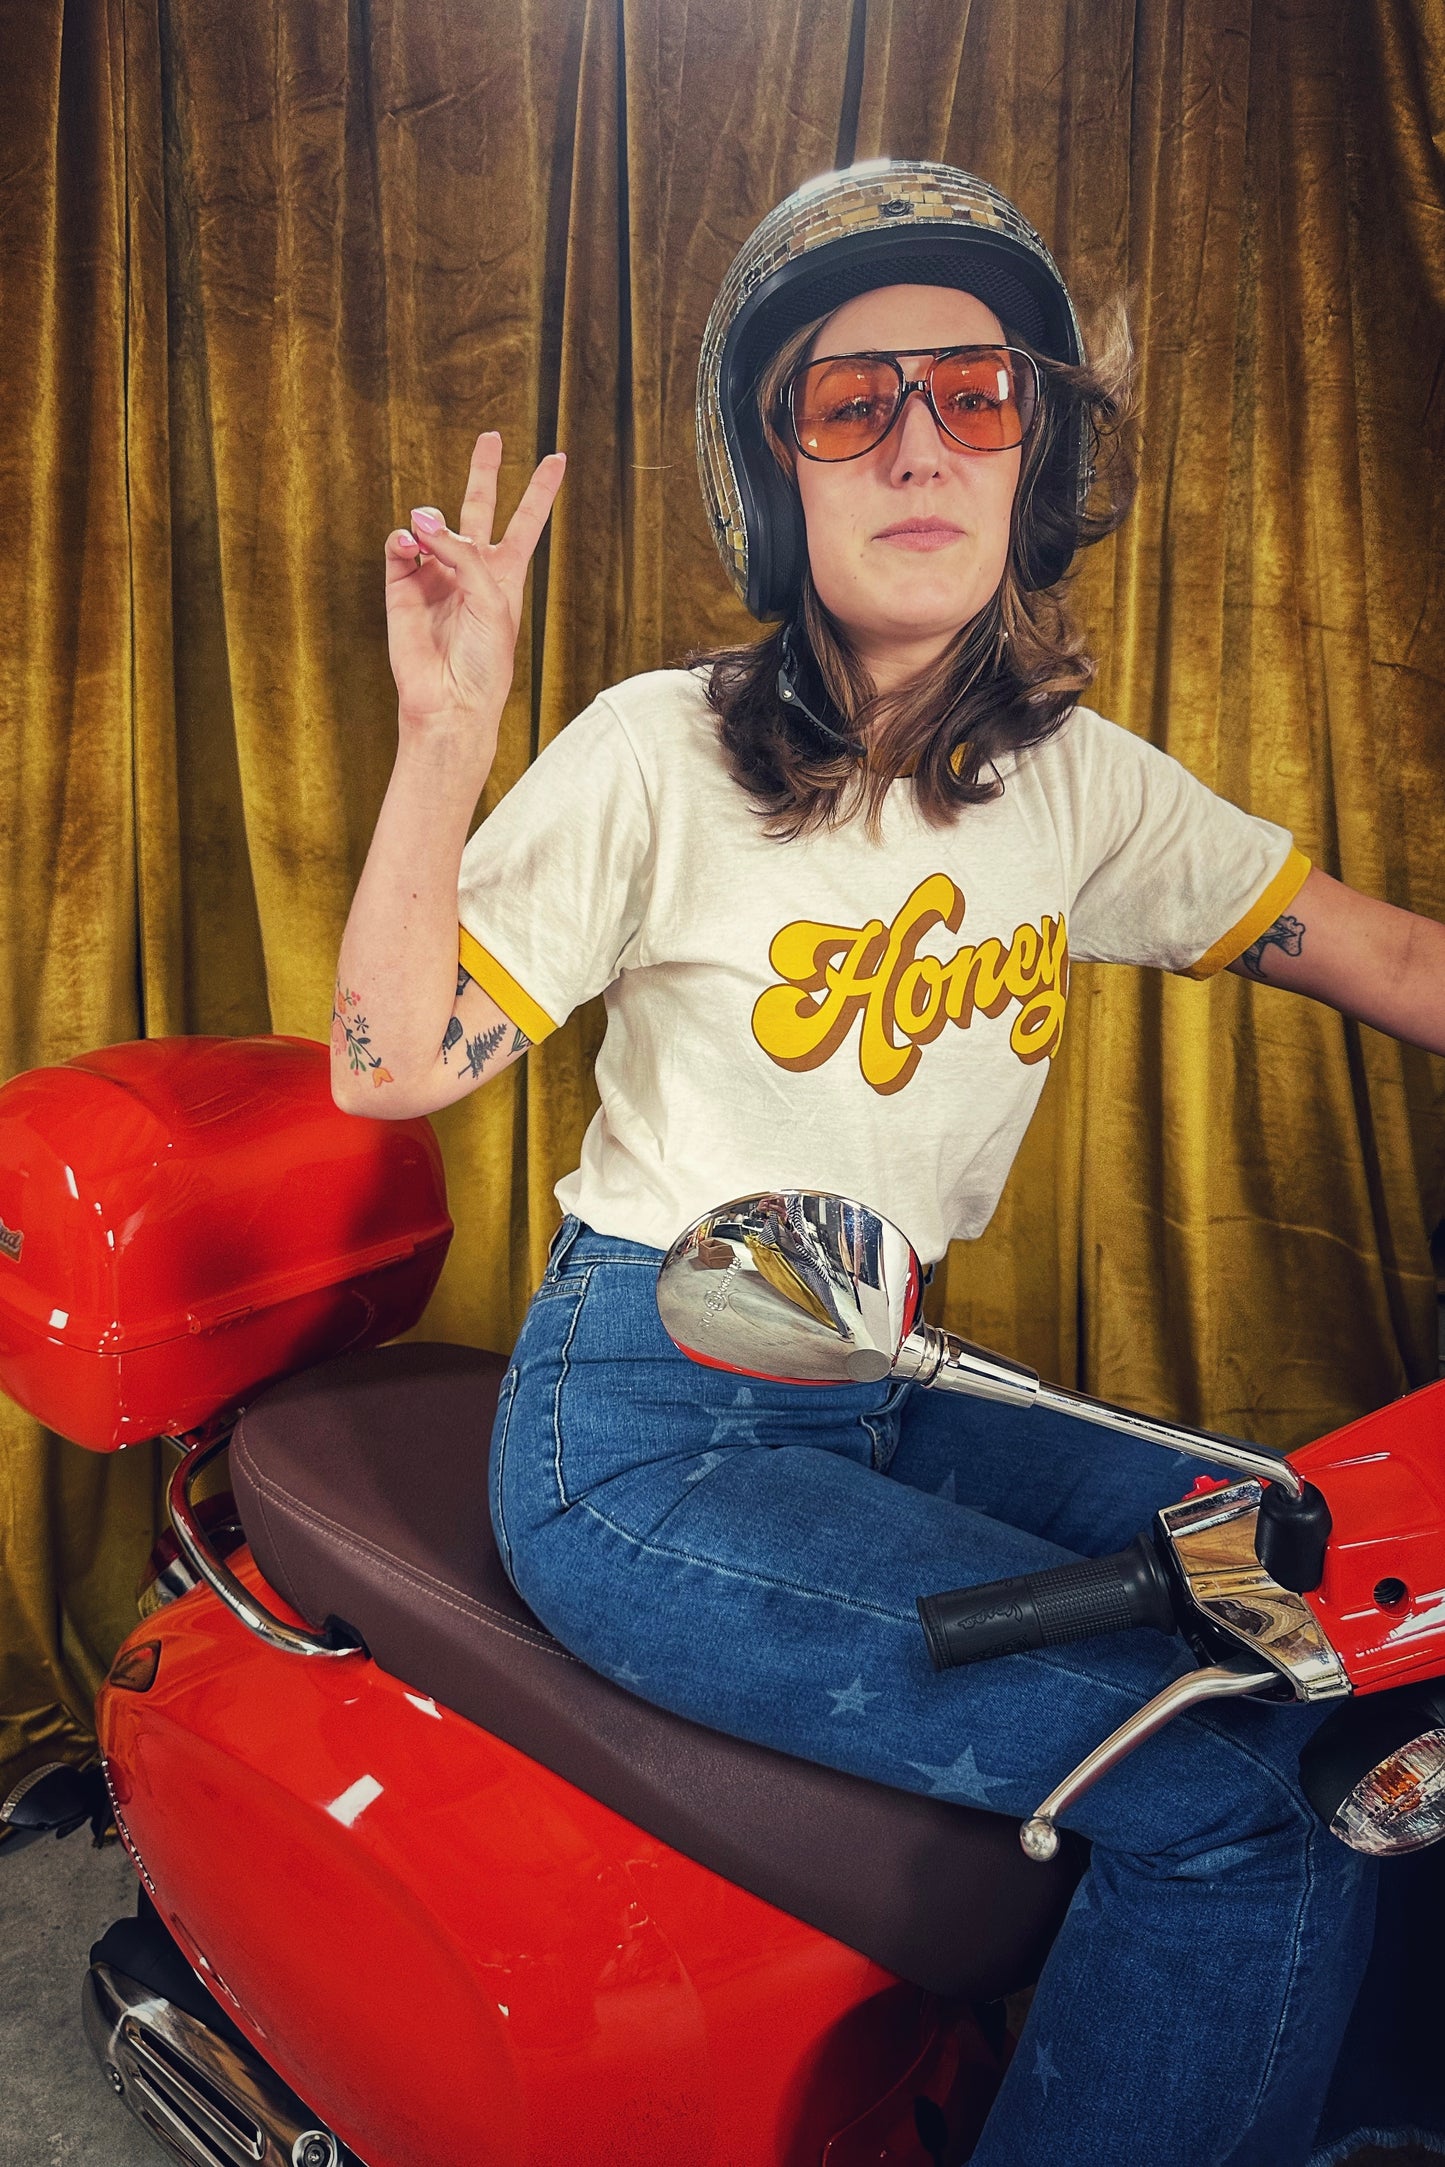 cool-girl-riding-scooter-wearing-groovy-honey-tee-shirt